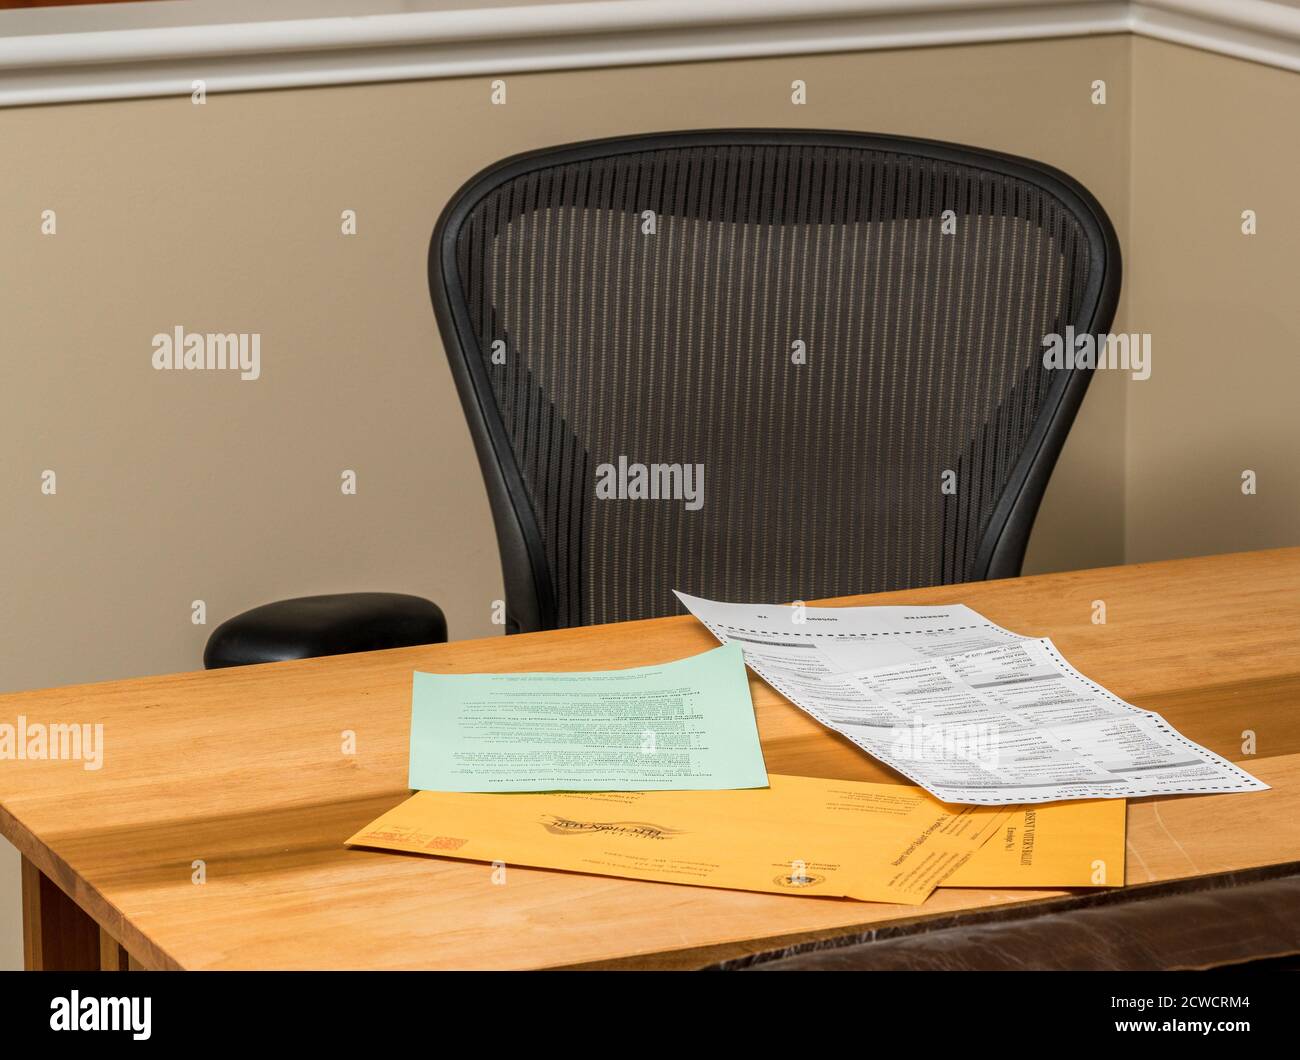 Empty home desk and chair with paperwork for completing the mail-in or absentee ballot for the 2020 presidential election Stock Photo